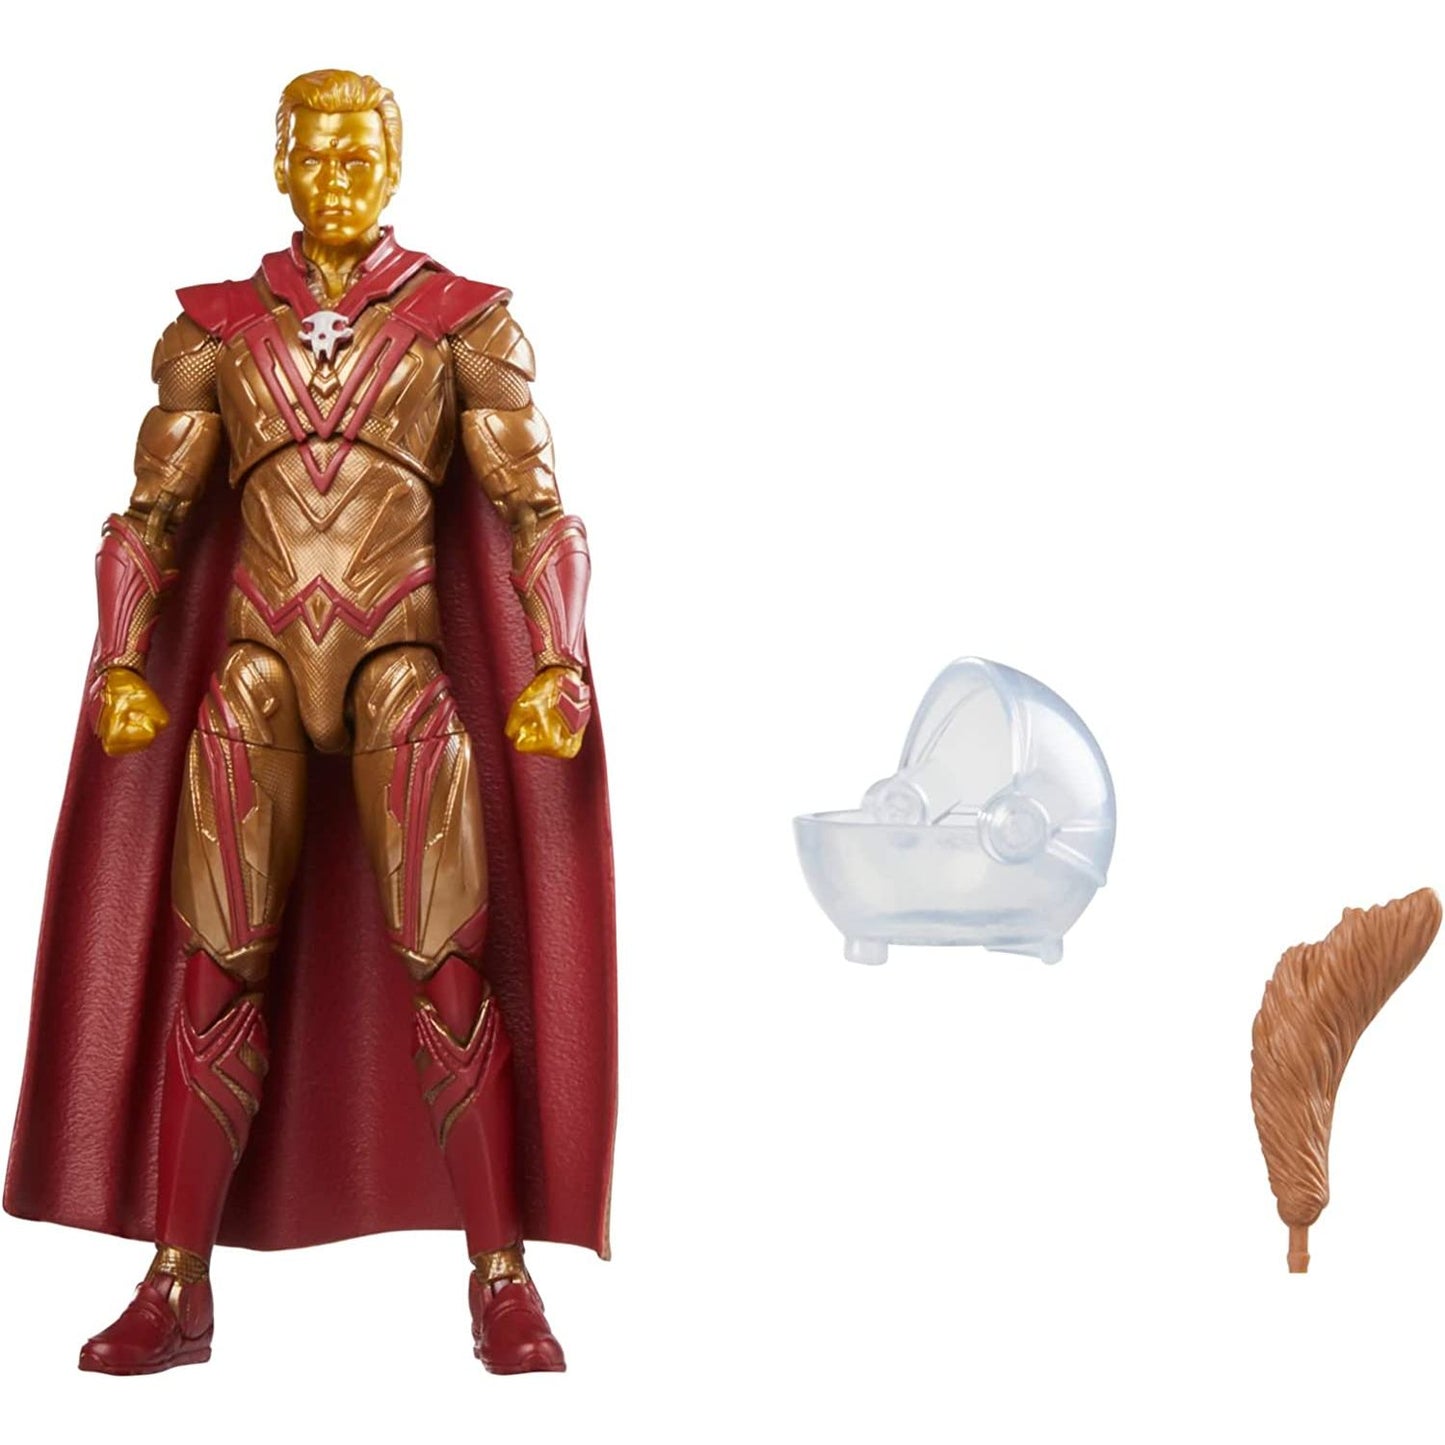  Guardians of the Galaxy Vol. 3 Marvel Legends Adam Warlock 6-Inch Action Figure Toy with accessories